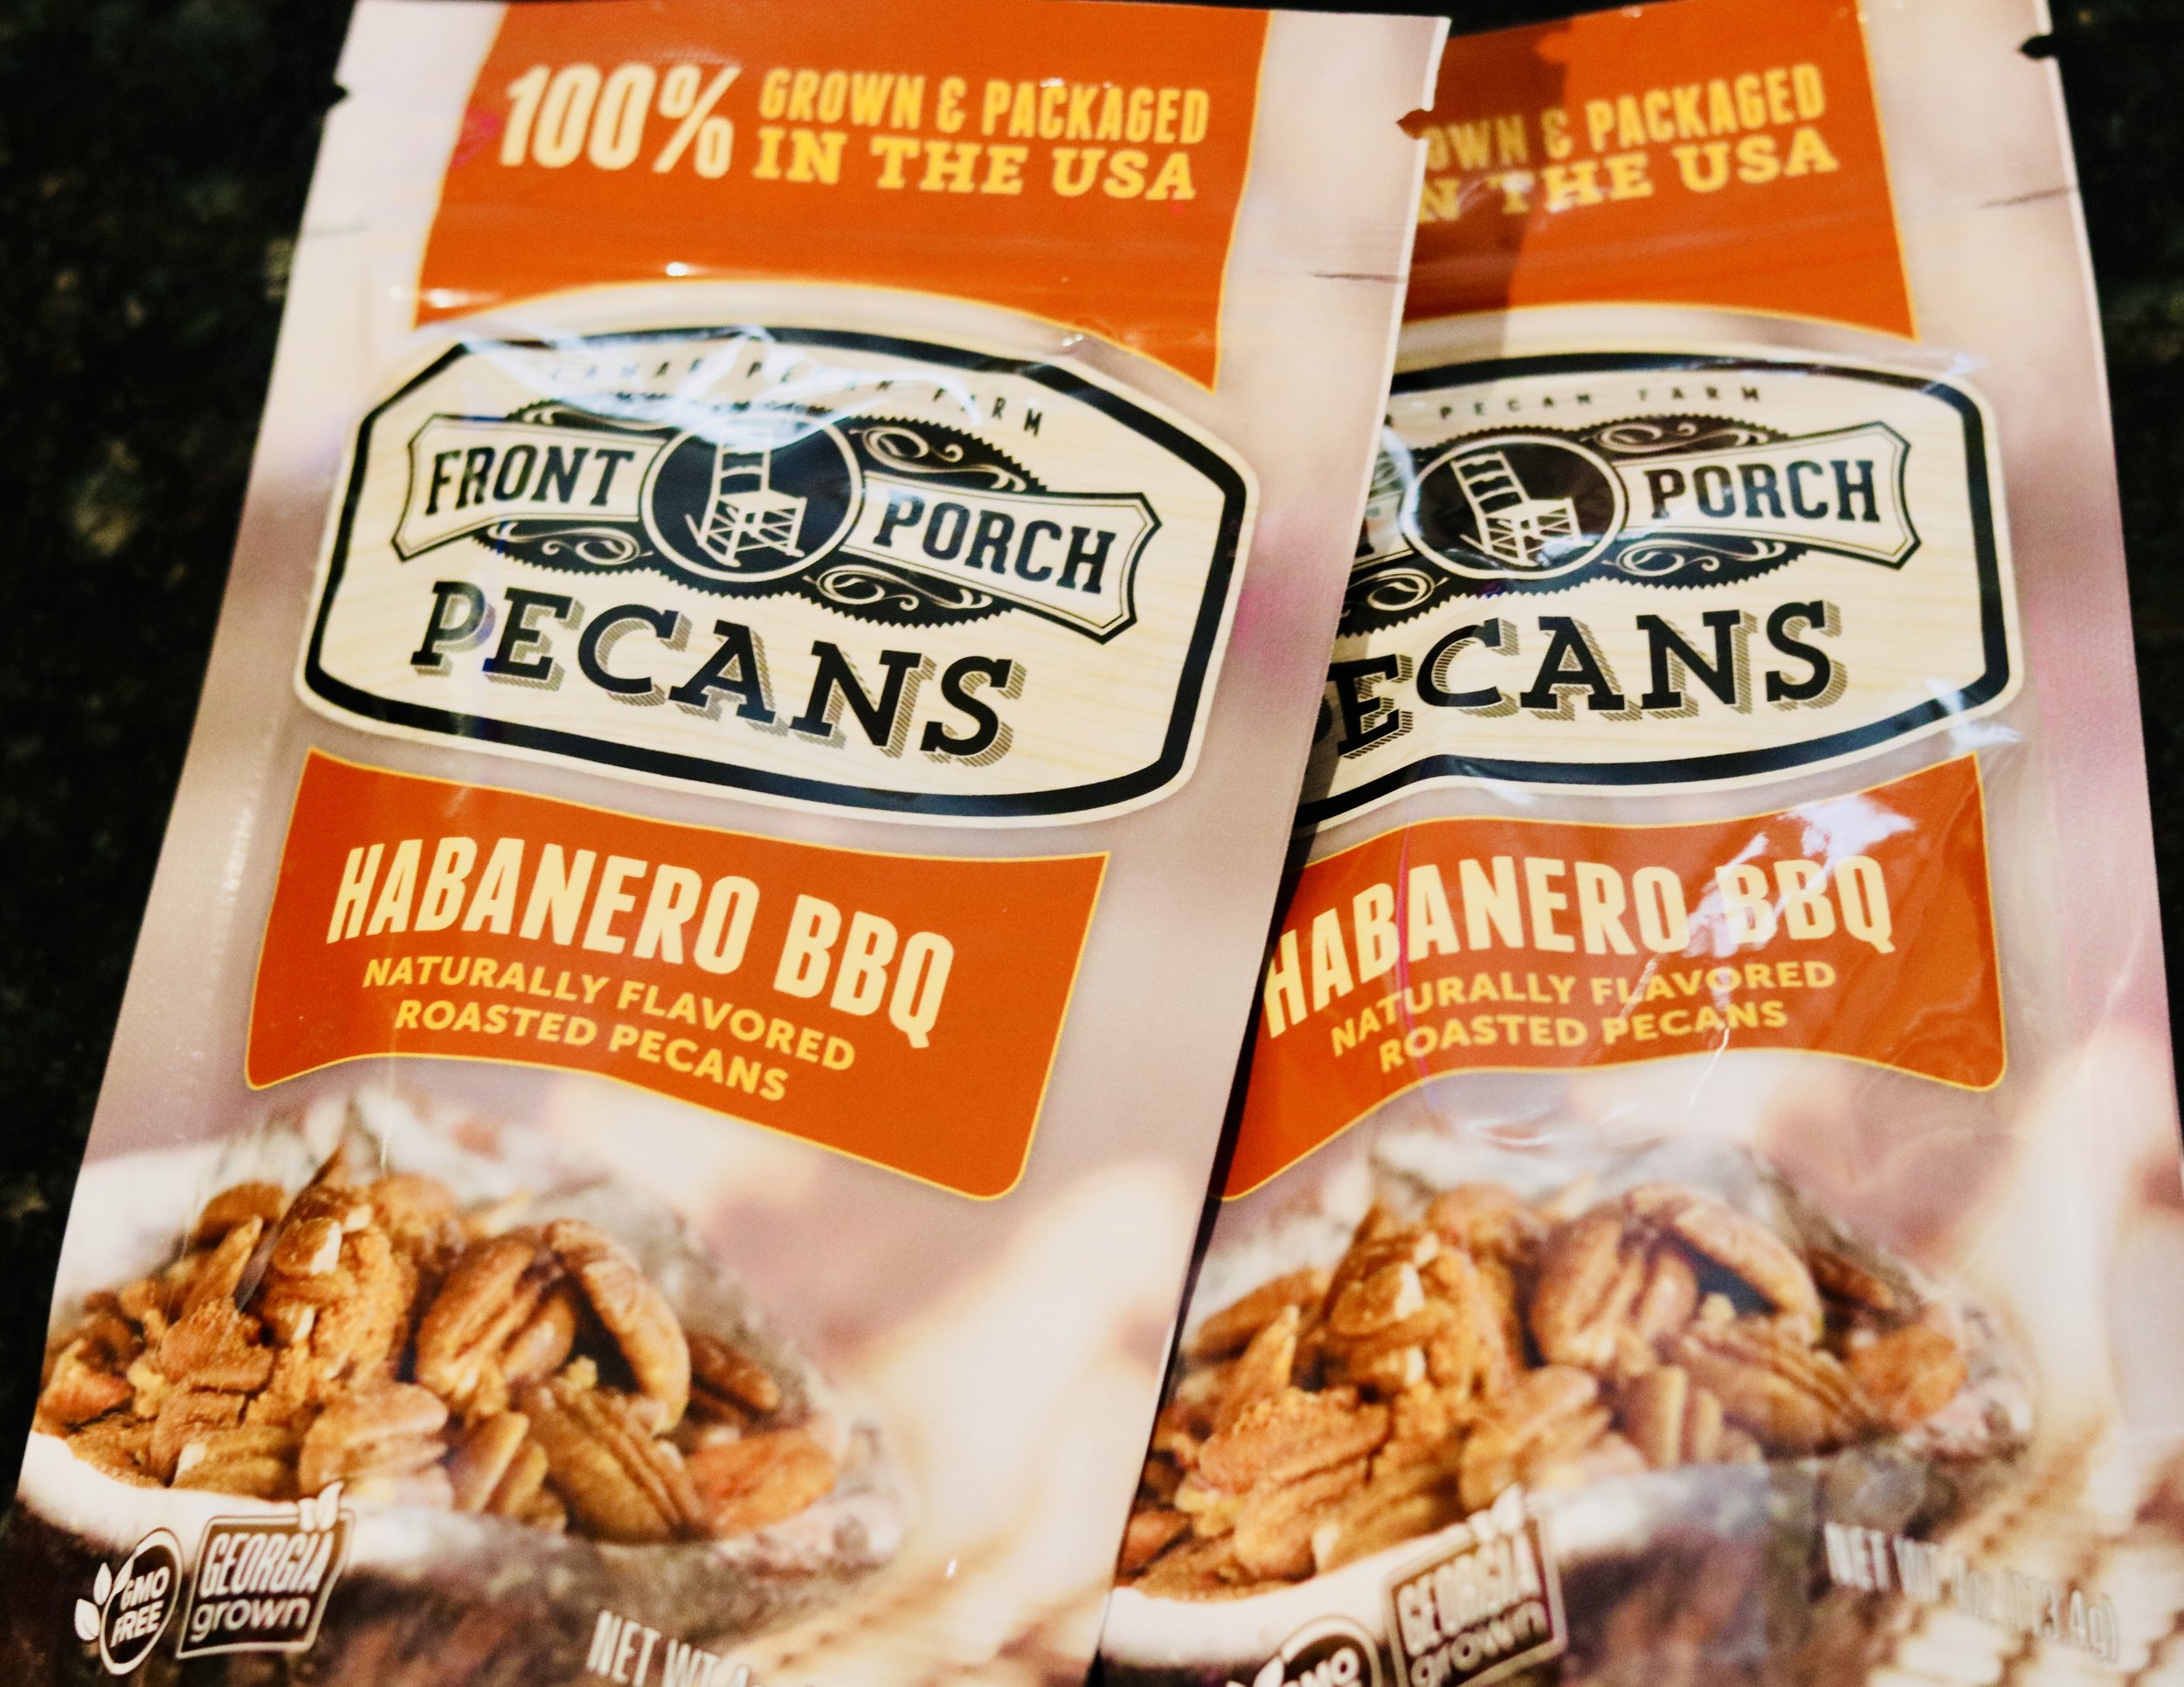 Two bags of Front Porch Pecans in Habanero BBQ flavor